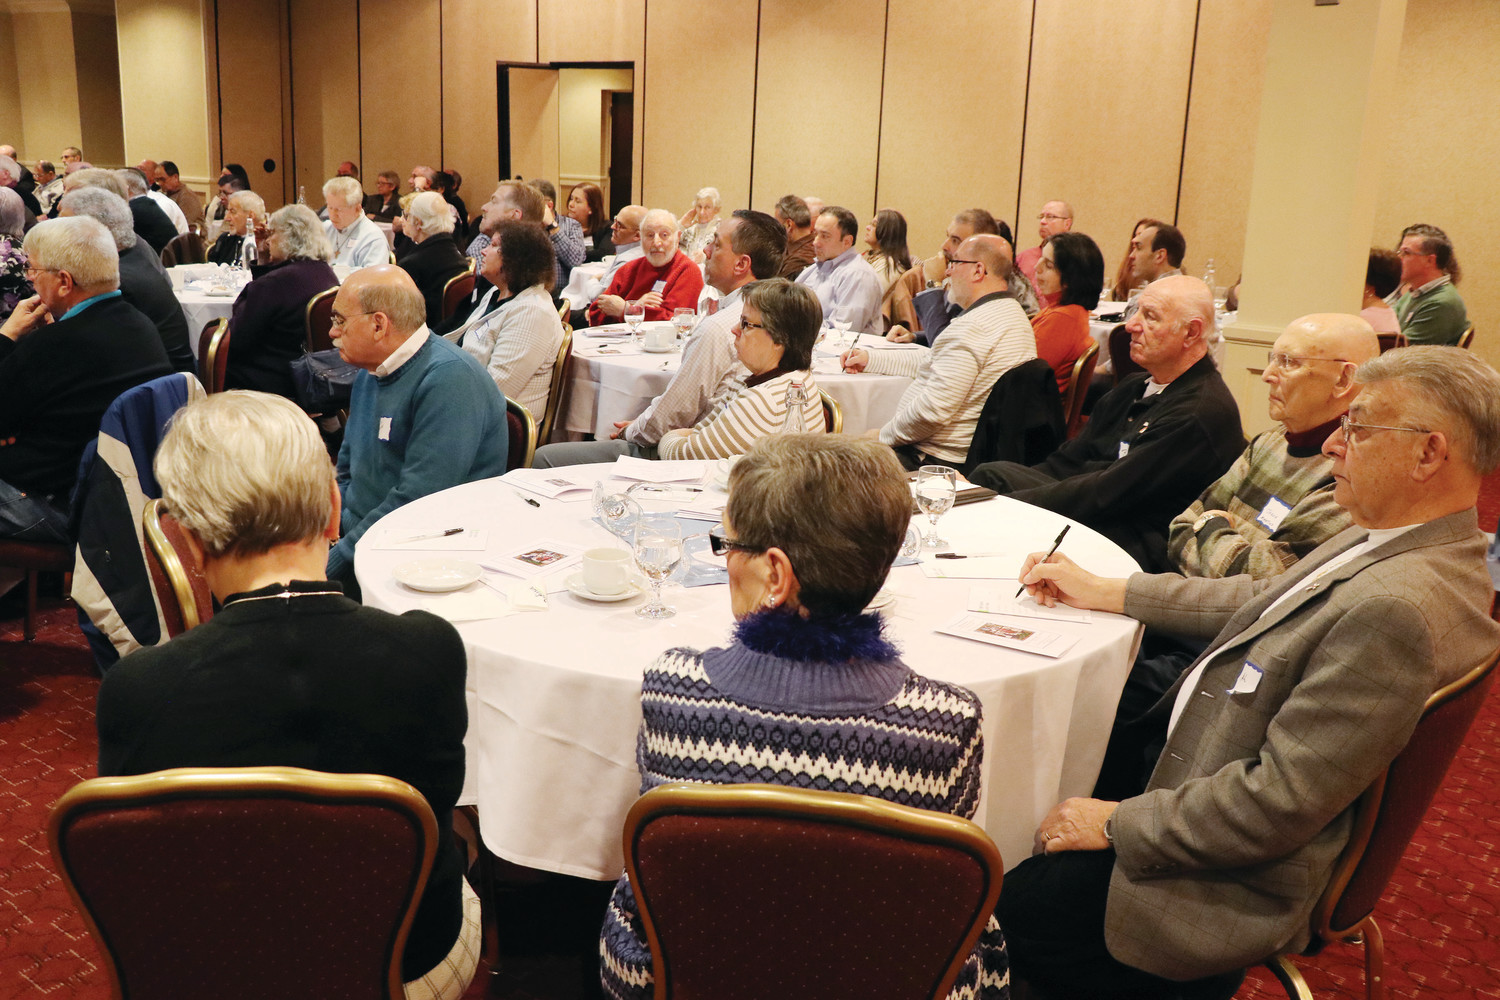 More than 75 permanent deacons in the Diocese of Providence — many joined by their wives — along with several men currently part of the 12 recently admitted to candidacy for ordination to the permanent diaconate gathered on February 3 at the Radisson Airport Hotel for their annual convocation.